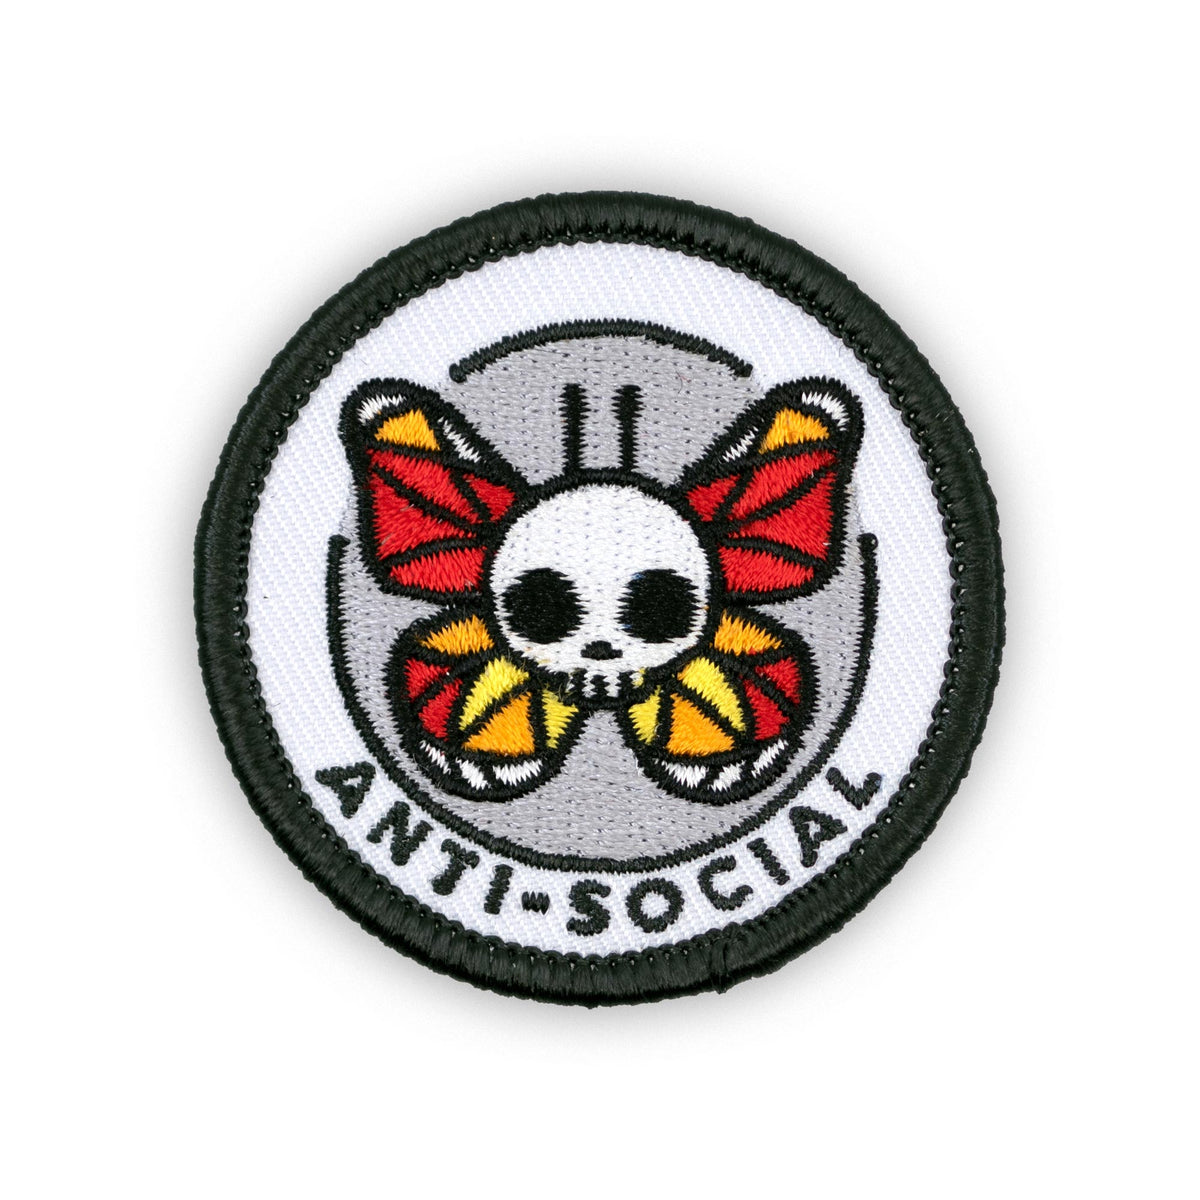 Anti-Social adulting merit badge patch for adults